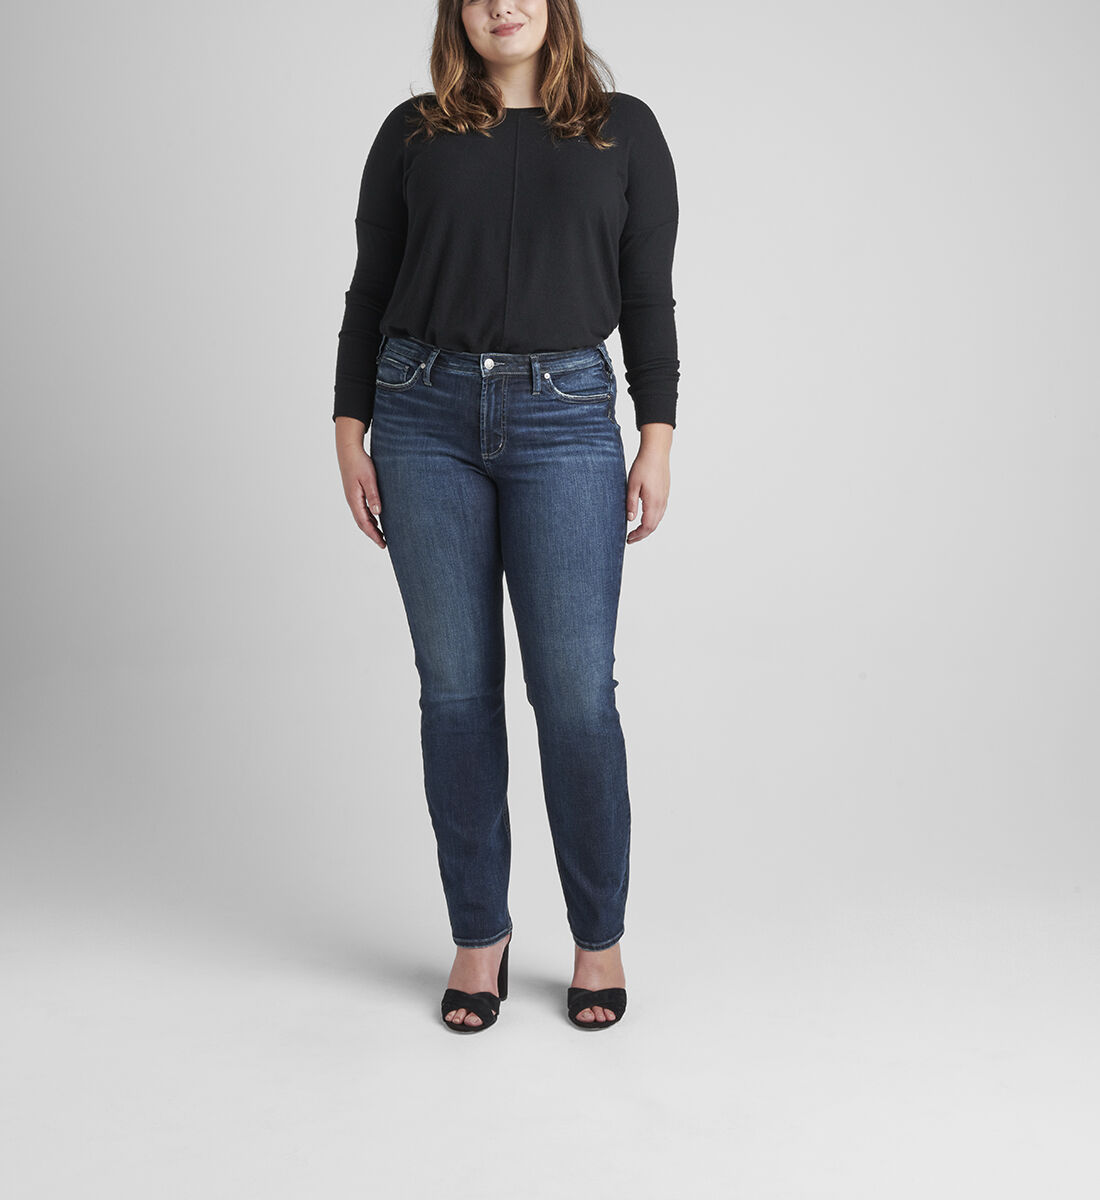 Most Wanted Mid Rise Straight Leg Jeans Plus Size Front